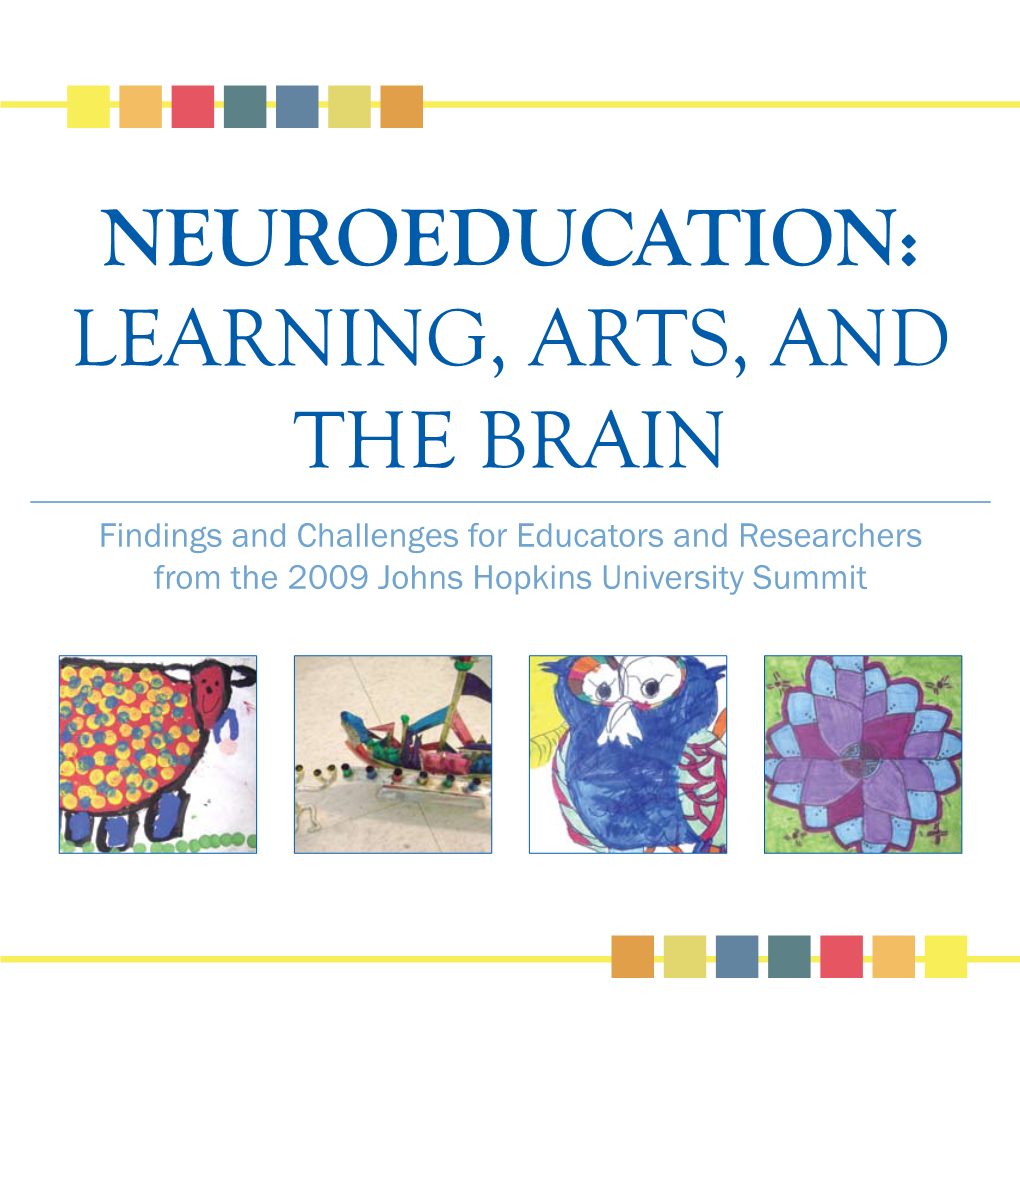 Neuroeducation: Learning, Arts, and the Brain